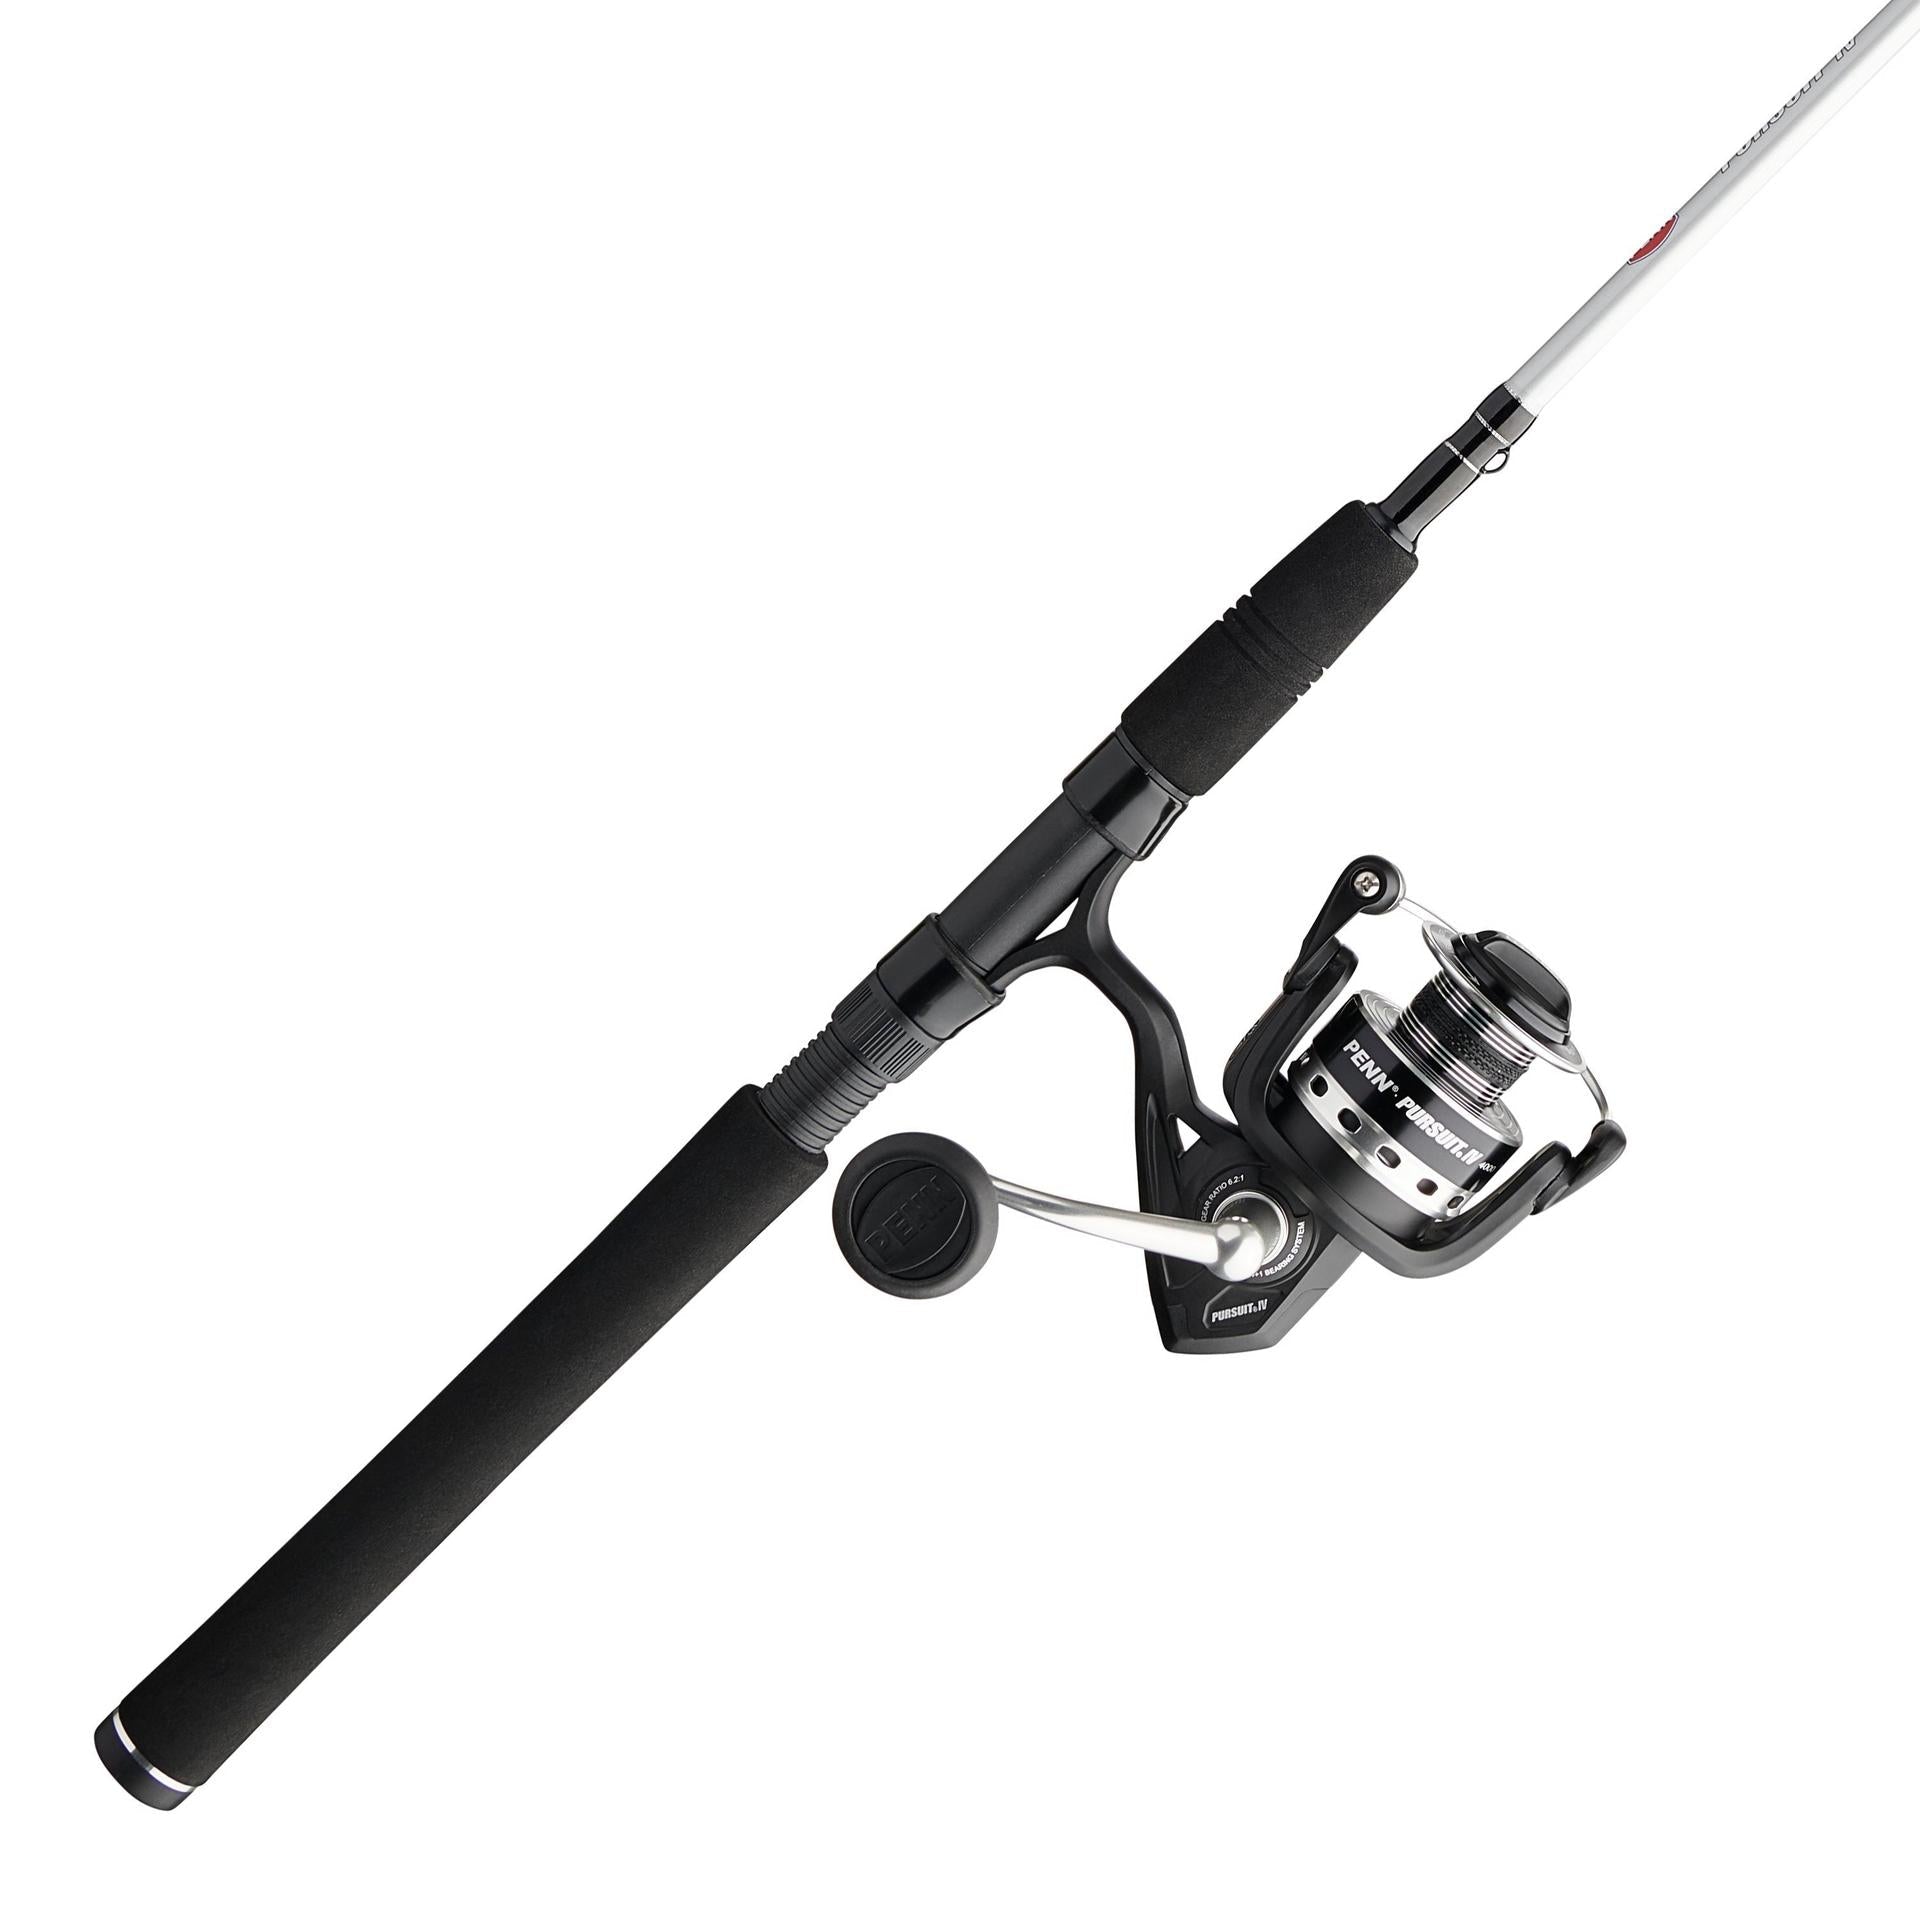 Fishing rods portable fishing rod and reel combo